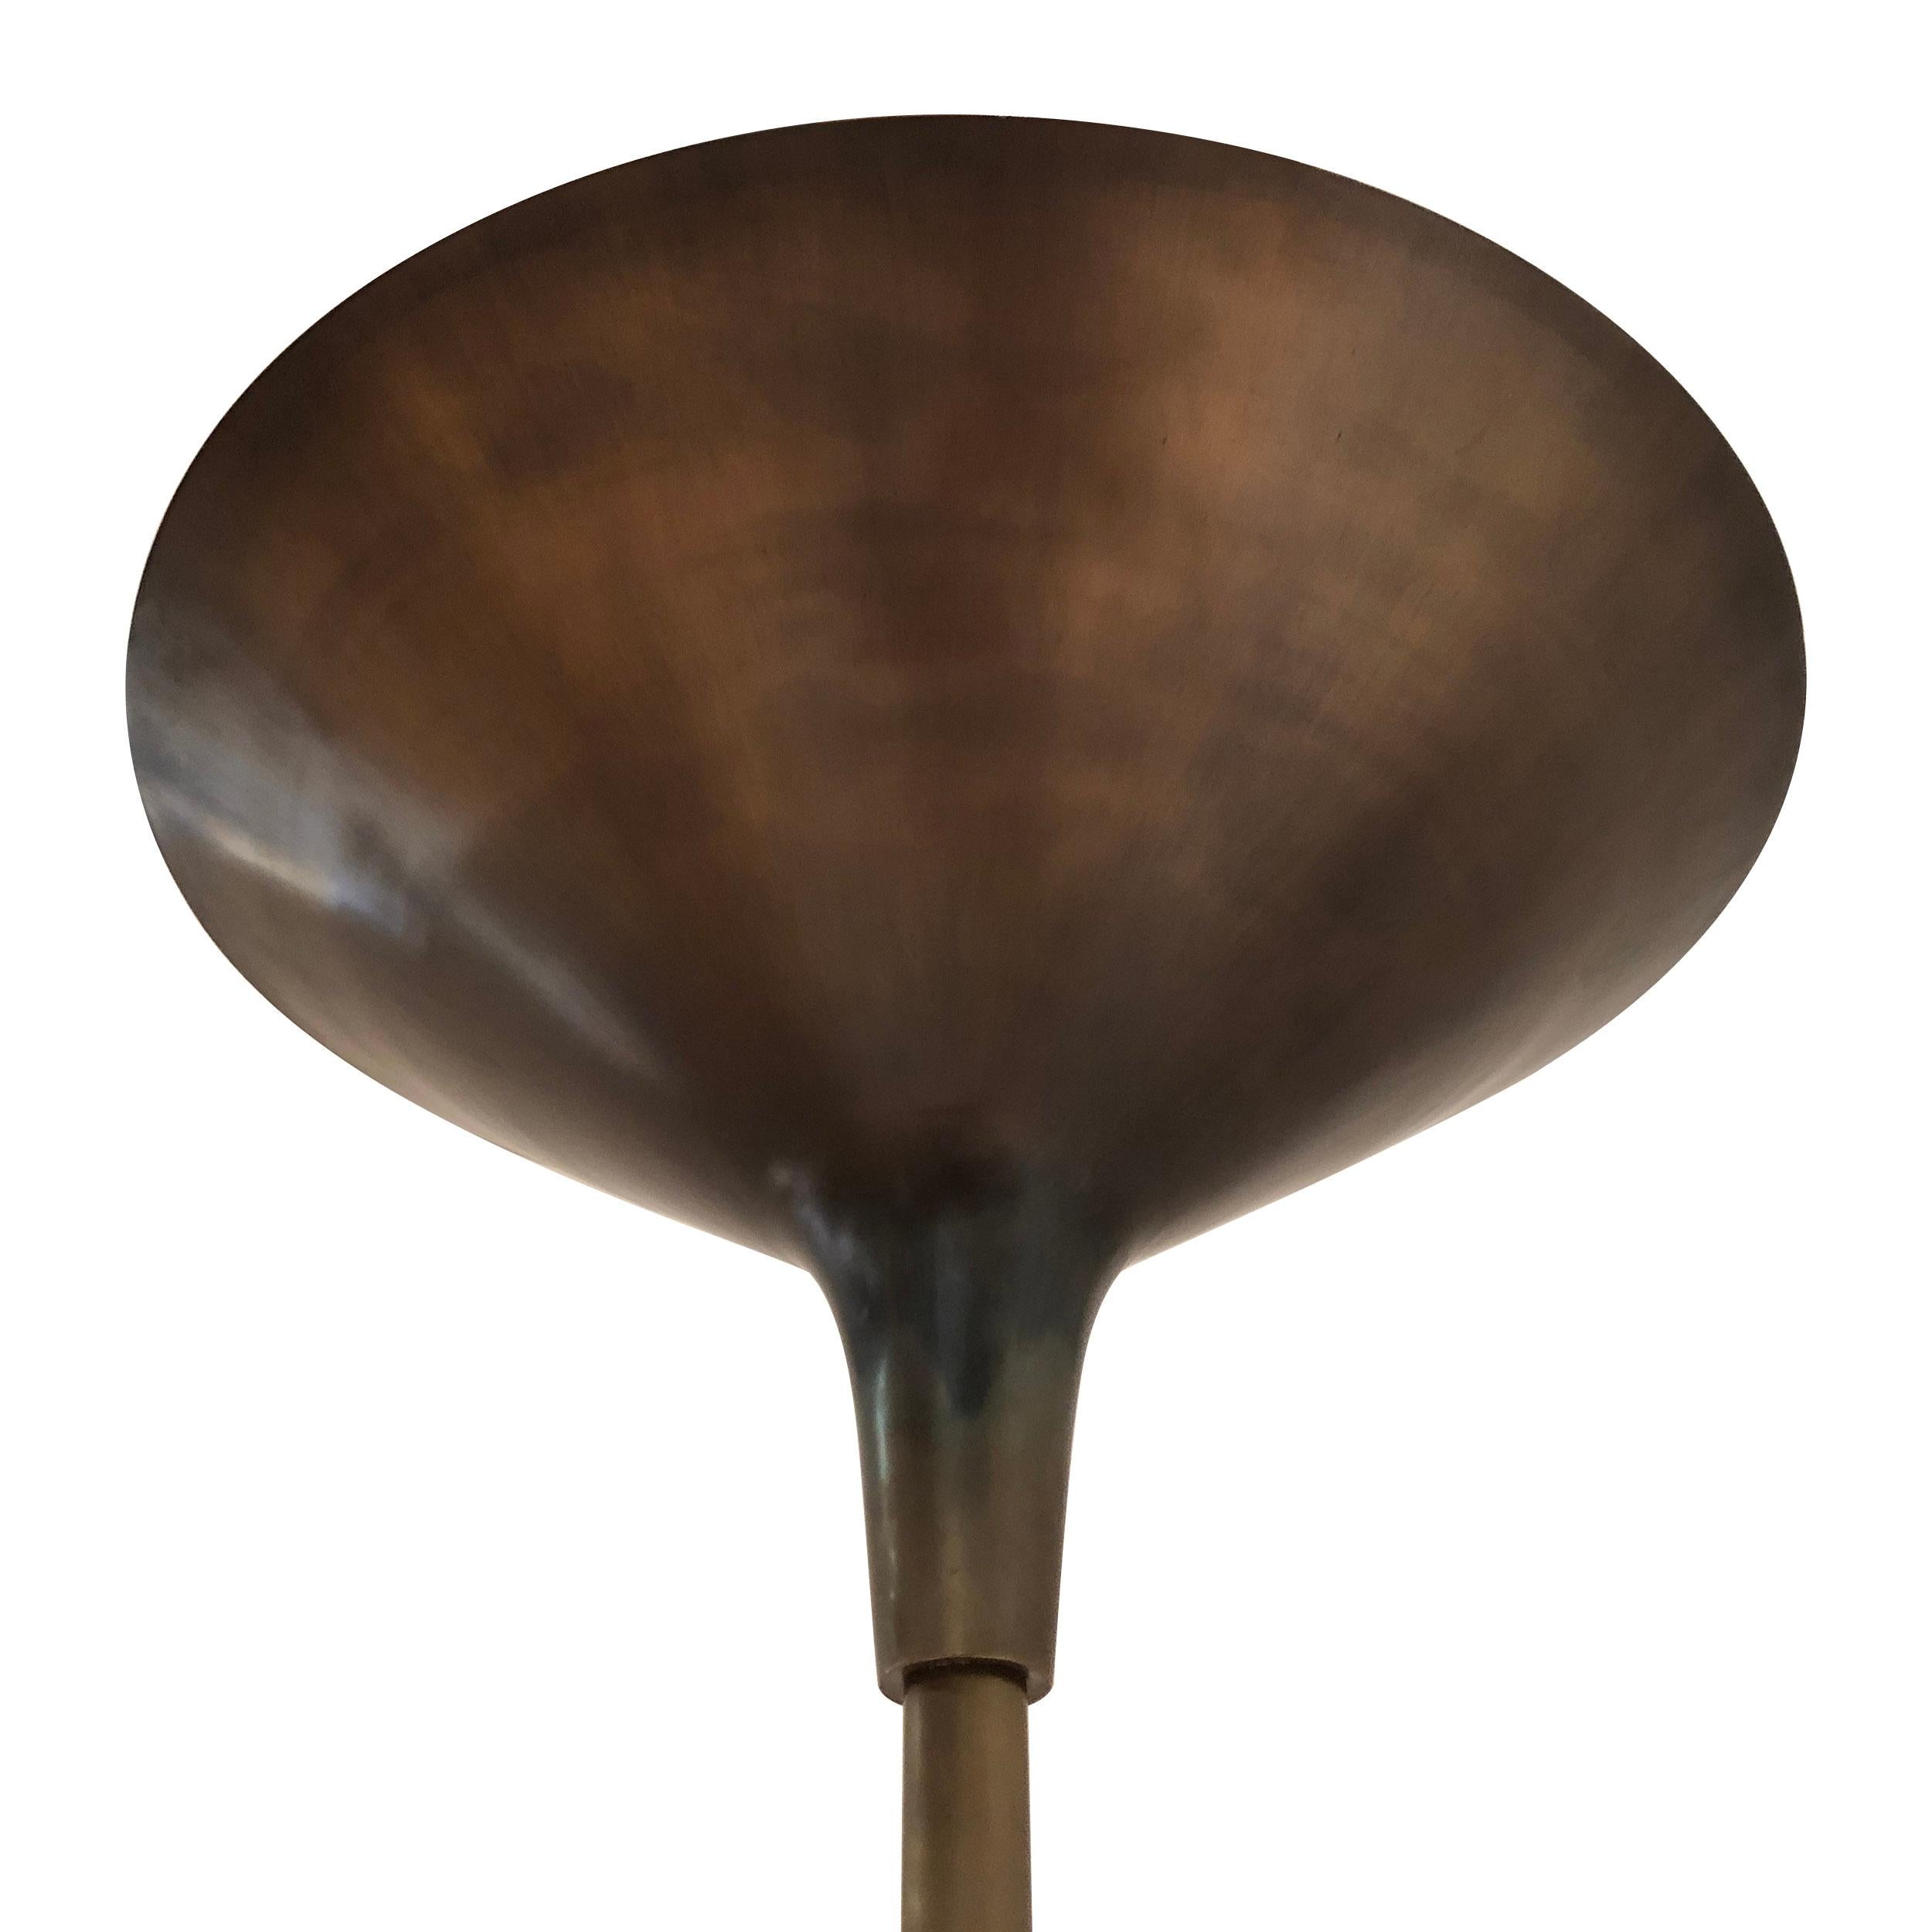 A Scandinavian Modern spun brass torchiere with a flared lamp shade on a disc base. Manufactured in Denmark in the 1960s.